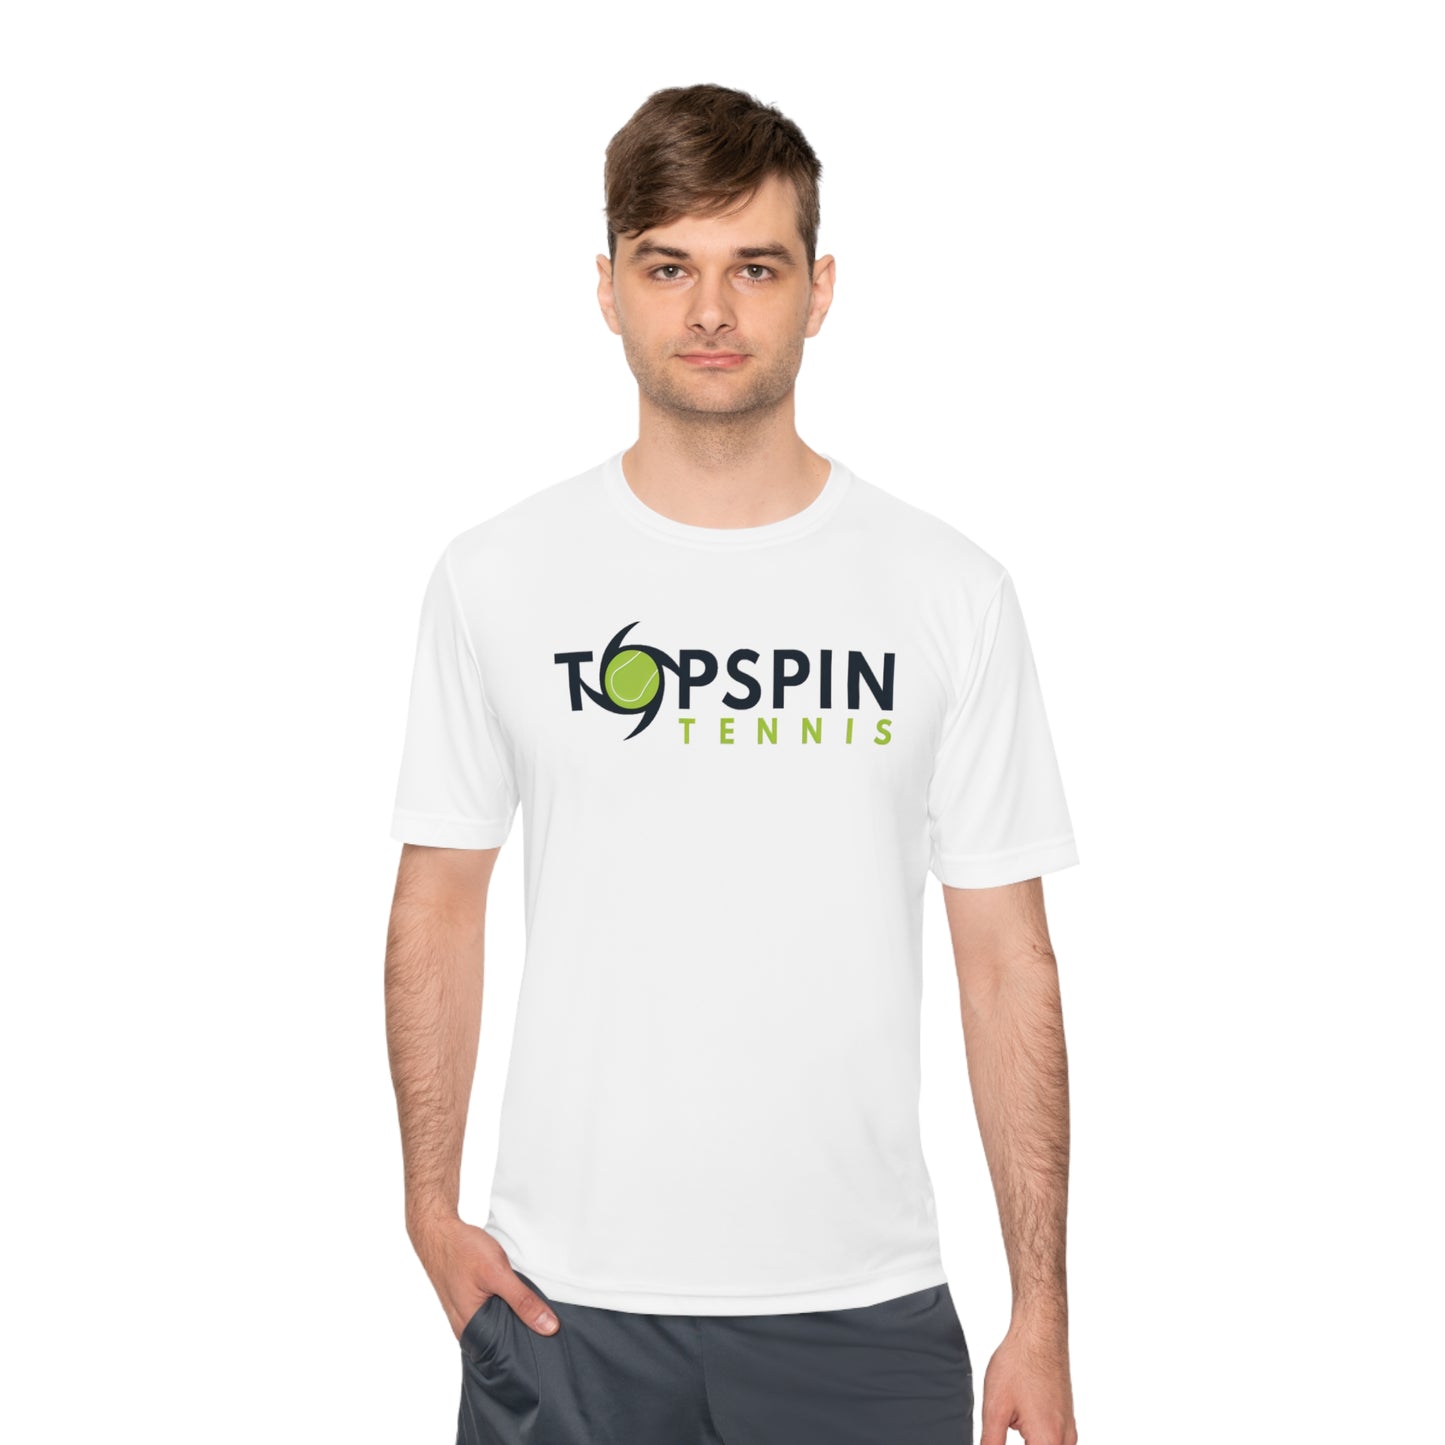 Topspin Tennis Unisex Athleticwear Shirt (Recommend sizing down)